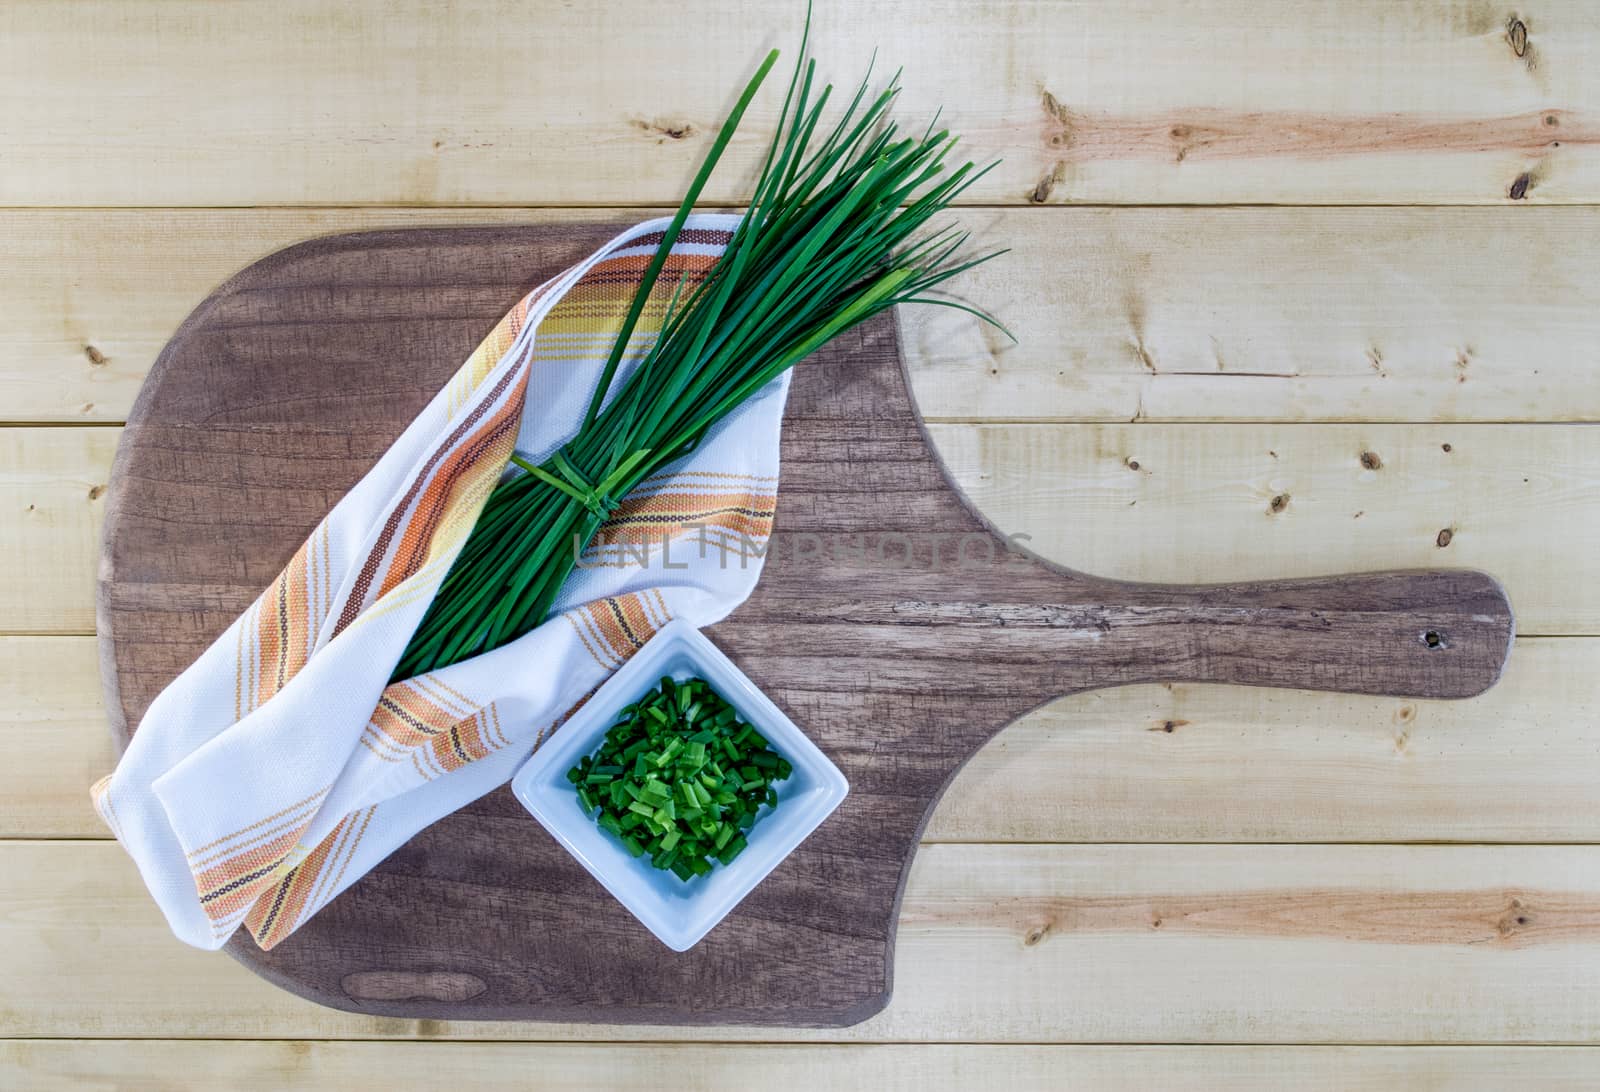 Fresh chives nestled in vintage kitchen towel, on rustic wooden board